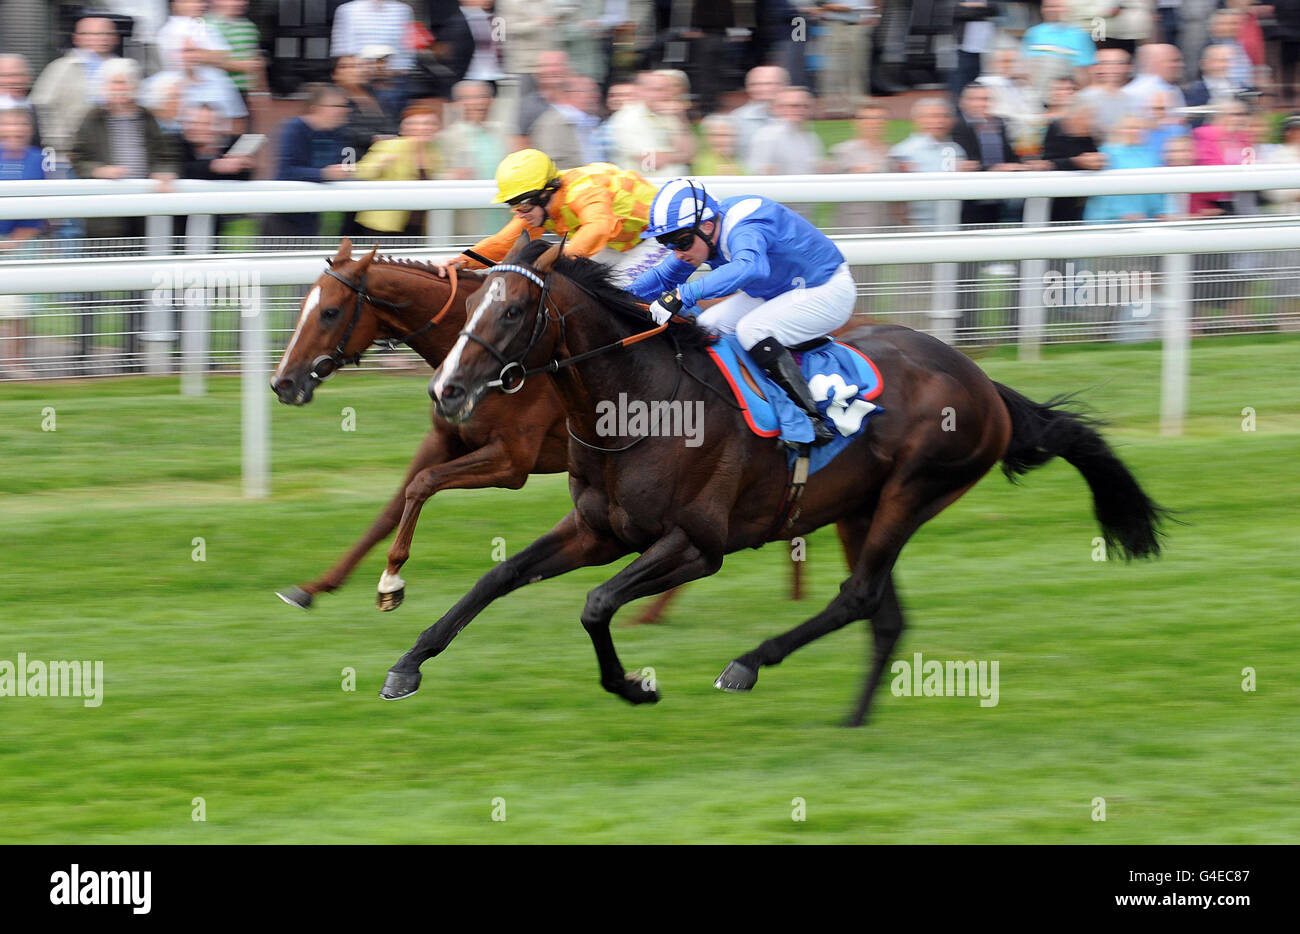 Awsaal ridden by Tadhg O'Shea (right) beats Waldvogel ridden by Tom Eaves to win the Caravan Chairman's Charity Cup during day one of the 52nd John Smiths Cup Meeting at York Racecourse. Stock Photo